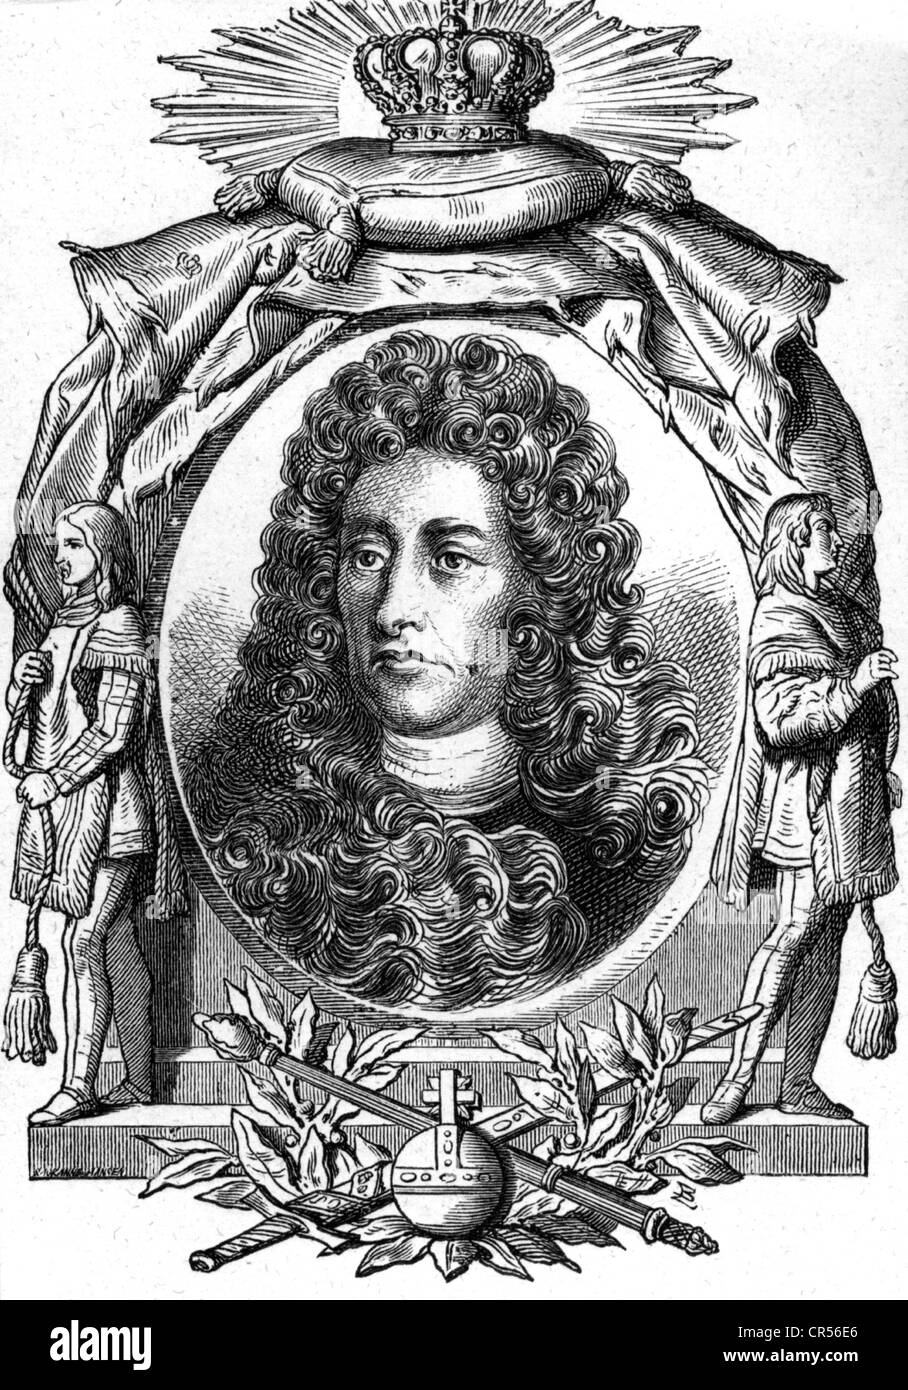 Louis William I 'Turk Louis', 8.4.1655 - 4.1.1707, margrave of Baden-Baden, Imperial general, portrait in picture frame, based on contemporary painting, Stock Photo